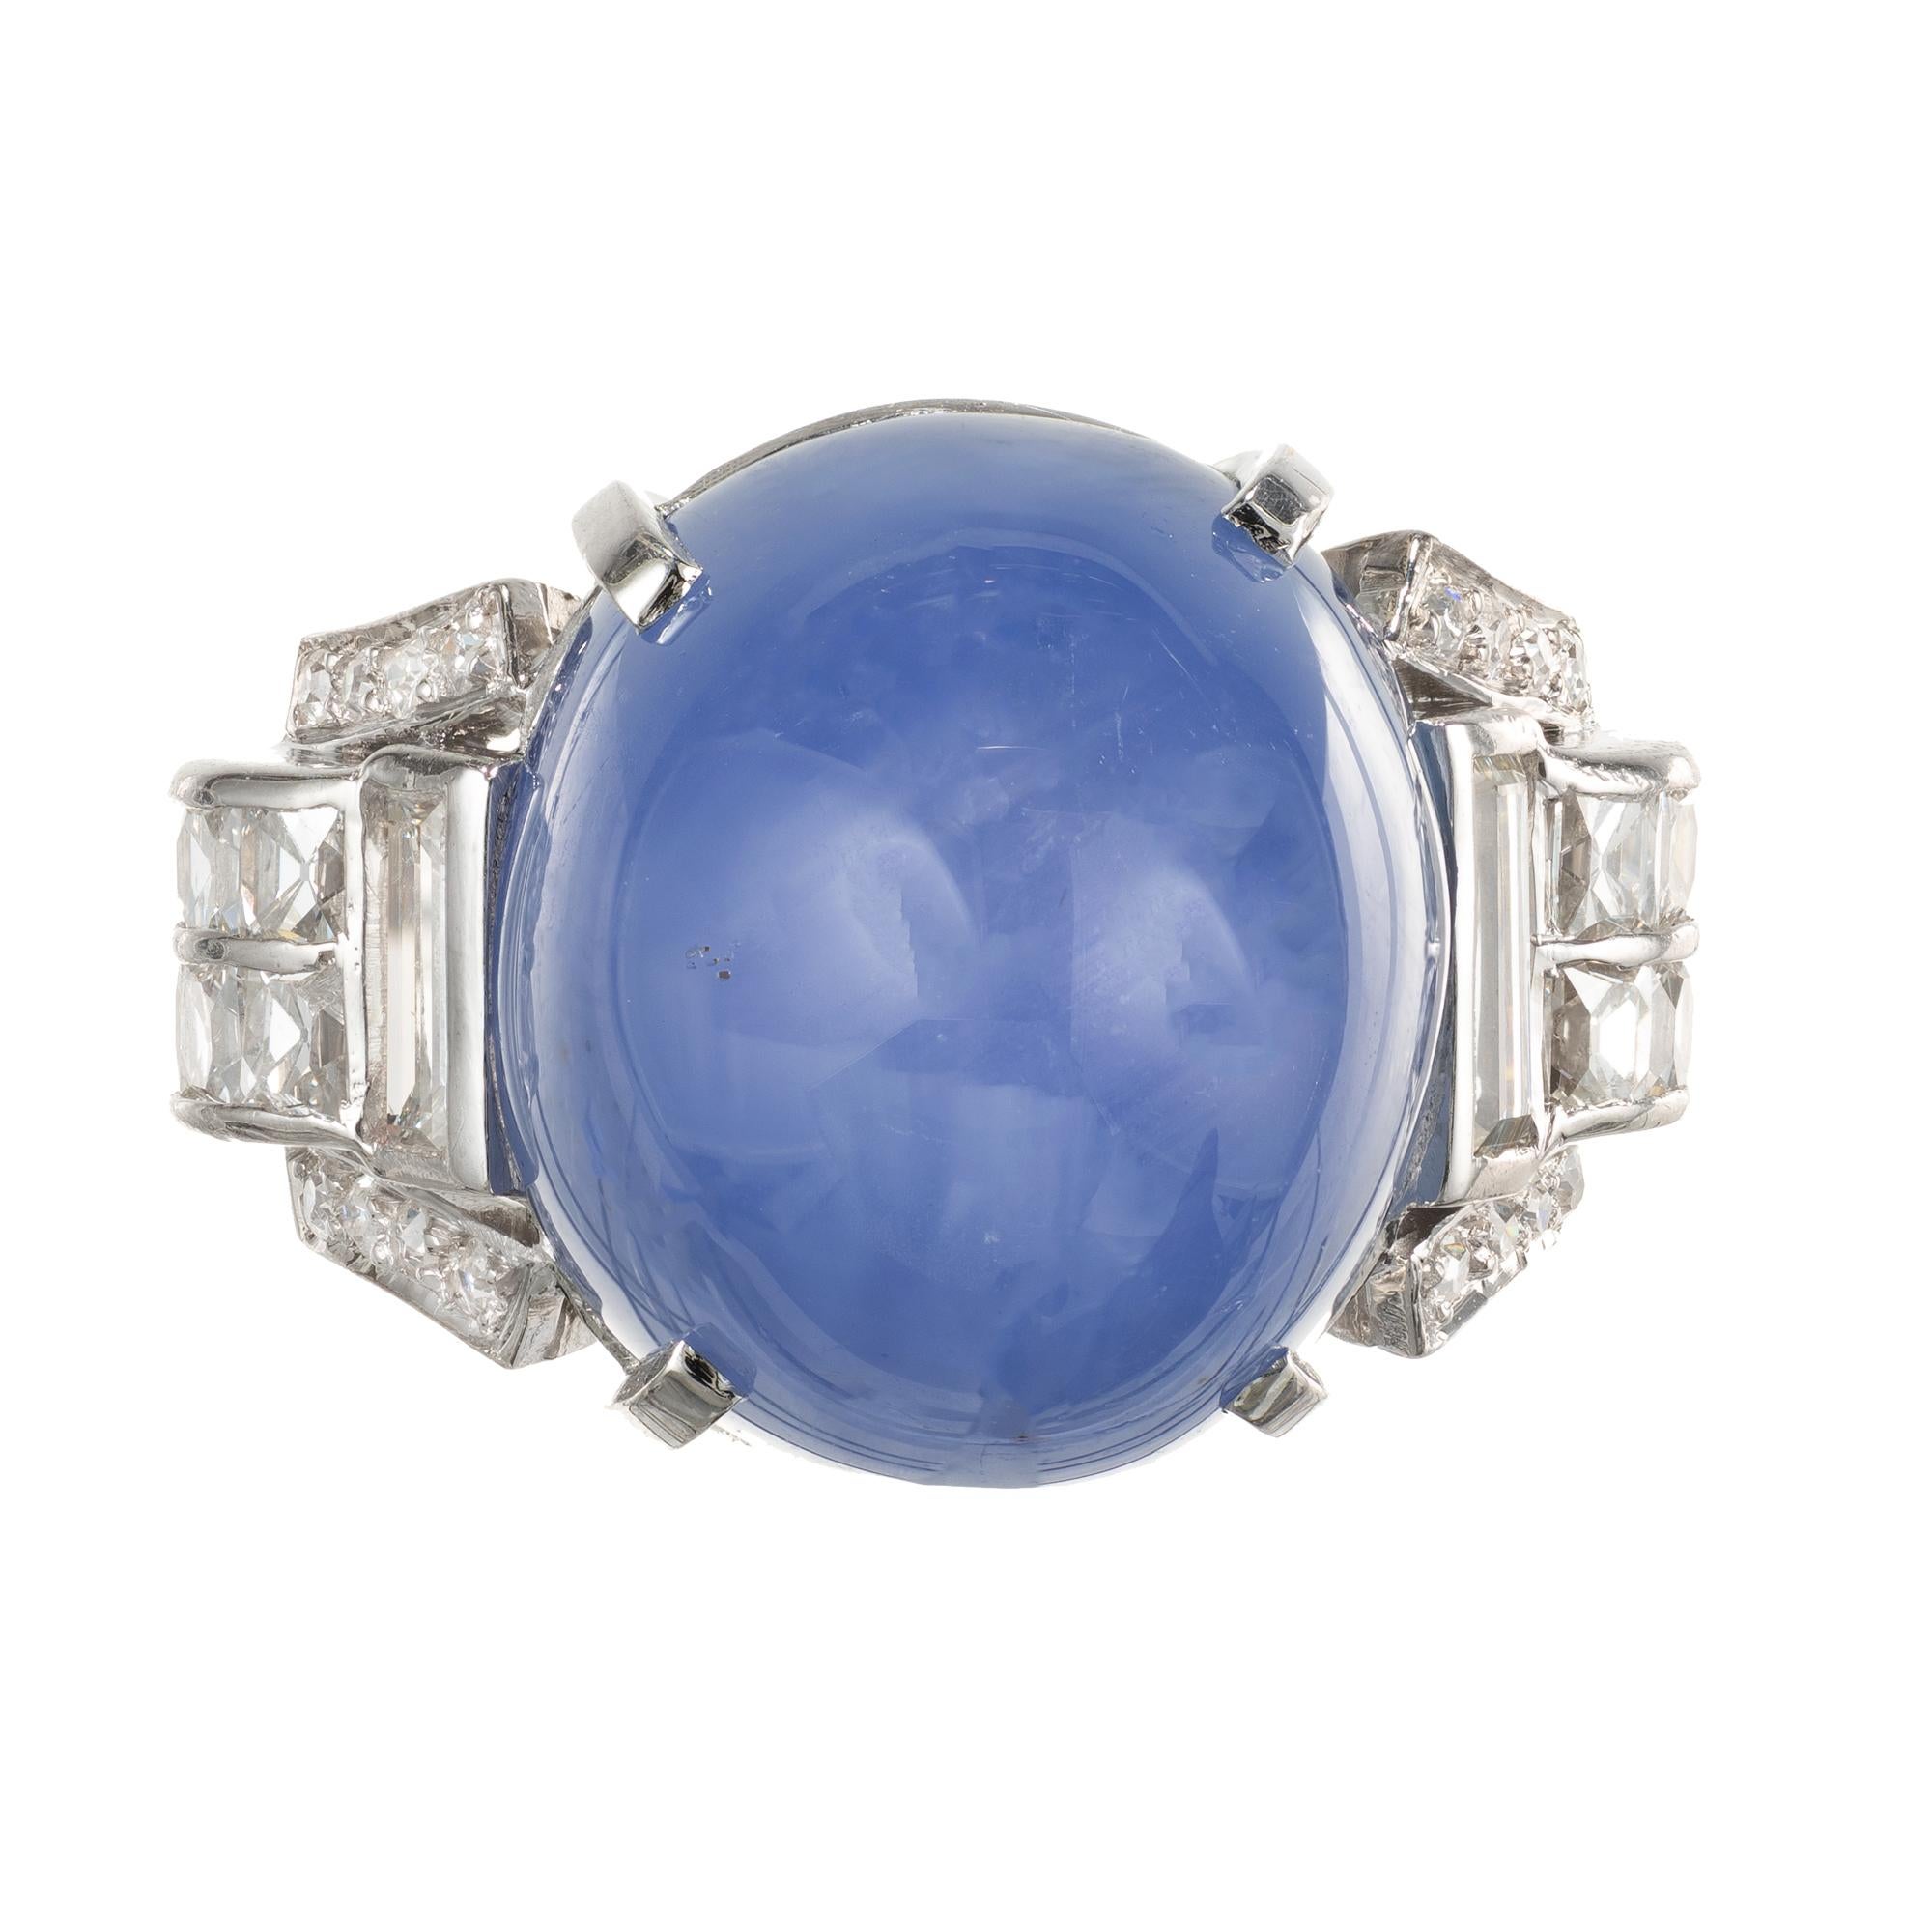 Art Deco 1920's Star sapphire and diamond ring. Handmade Platinum setting with a sugar loaf cut cabochon-medium blue center Star Sapphire with accent diamonds. GIA certified natural with no enhancements.

1 oval cabochon blue Star Sapphire, approx.